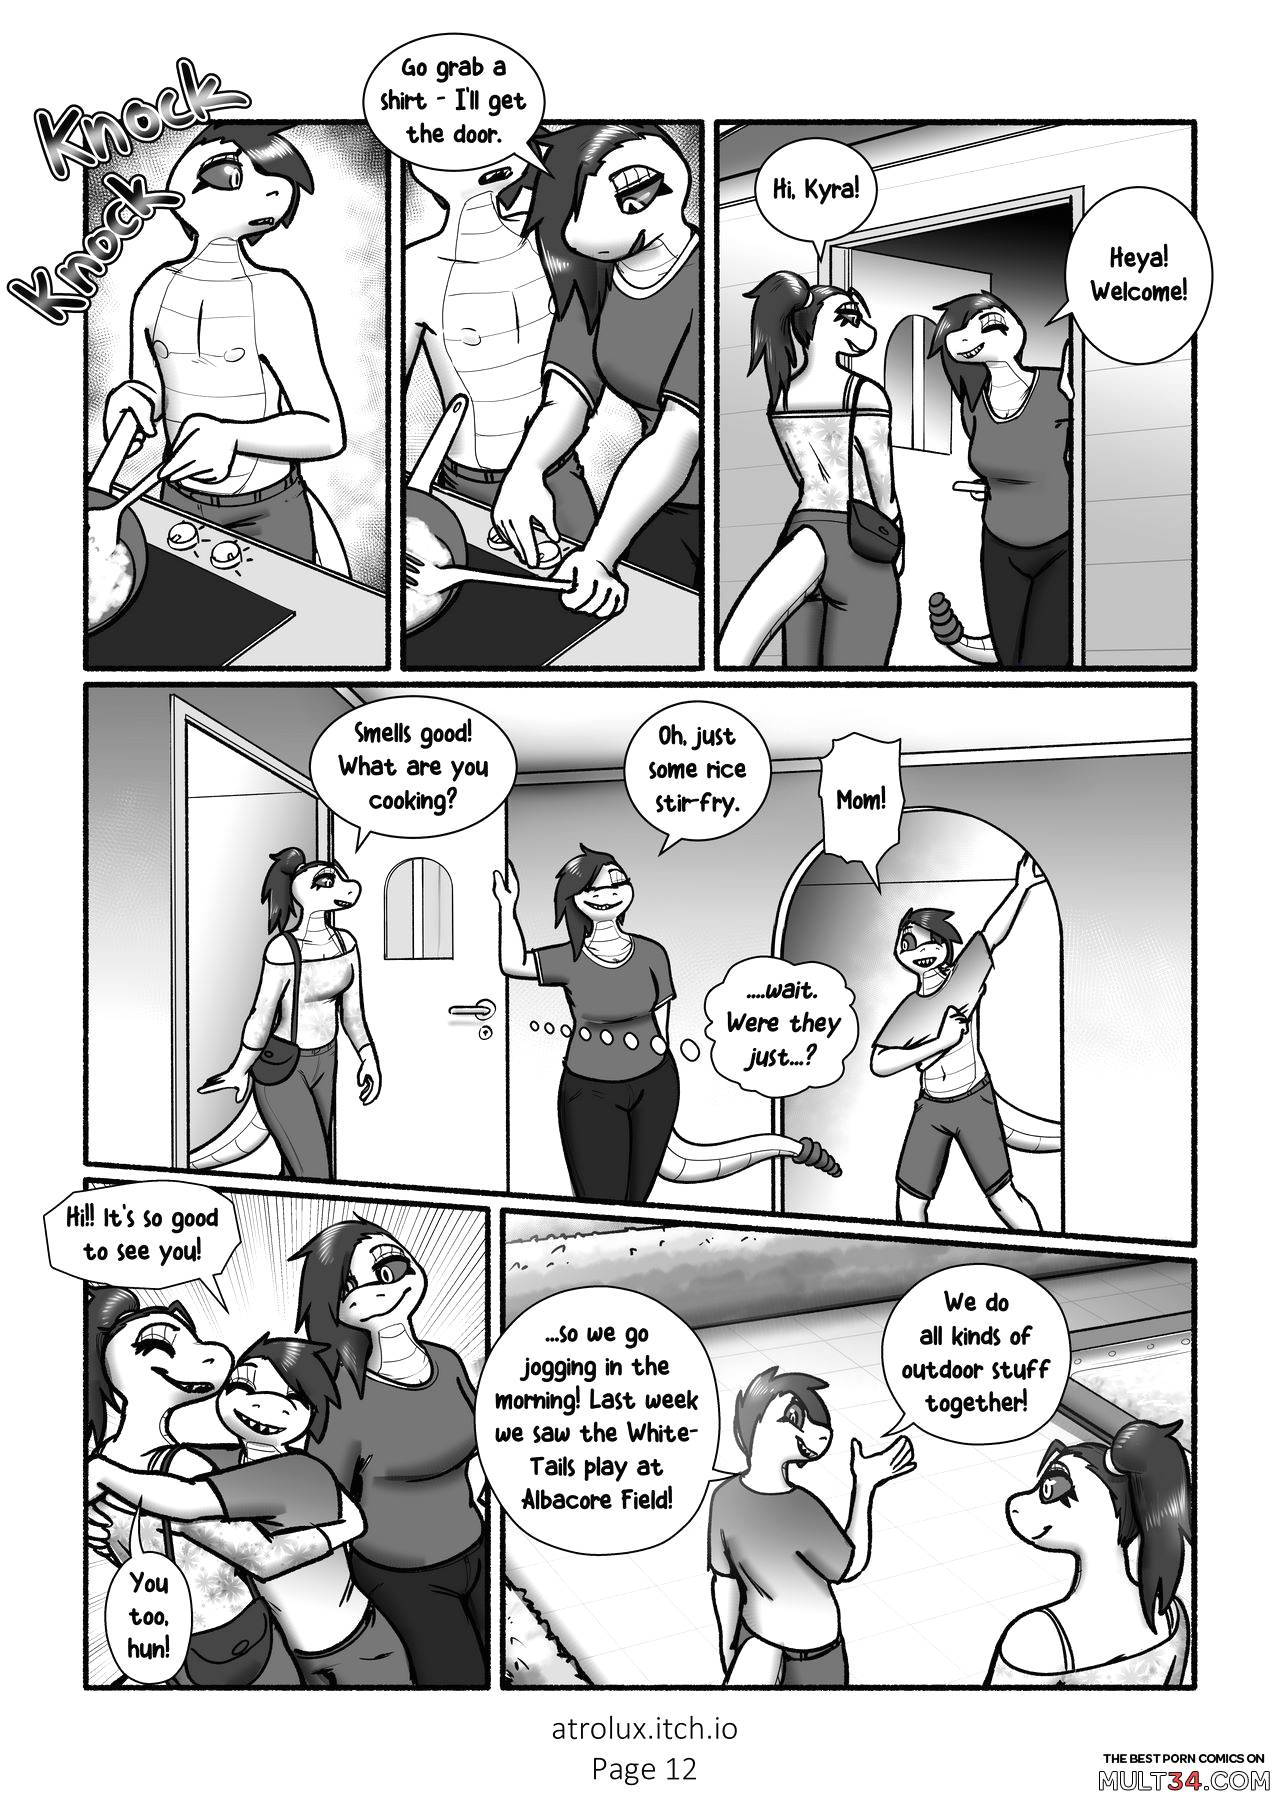 Shedding Inhibitions 6 - Feigned Innocence page 15